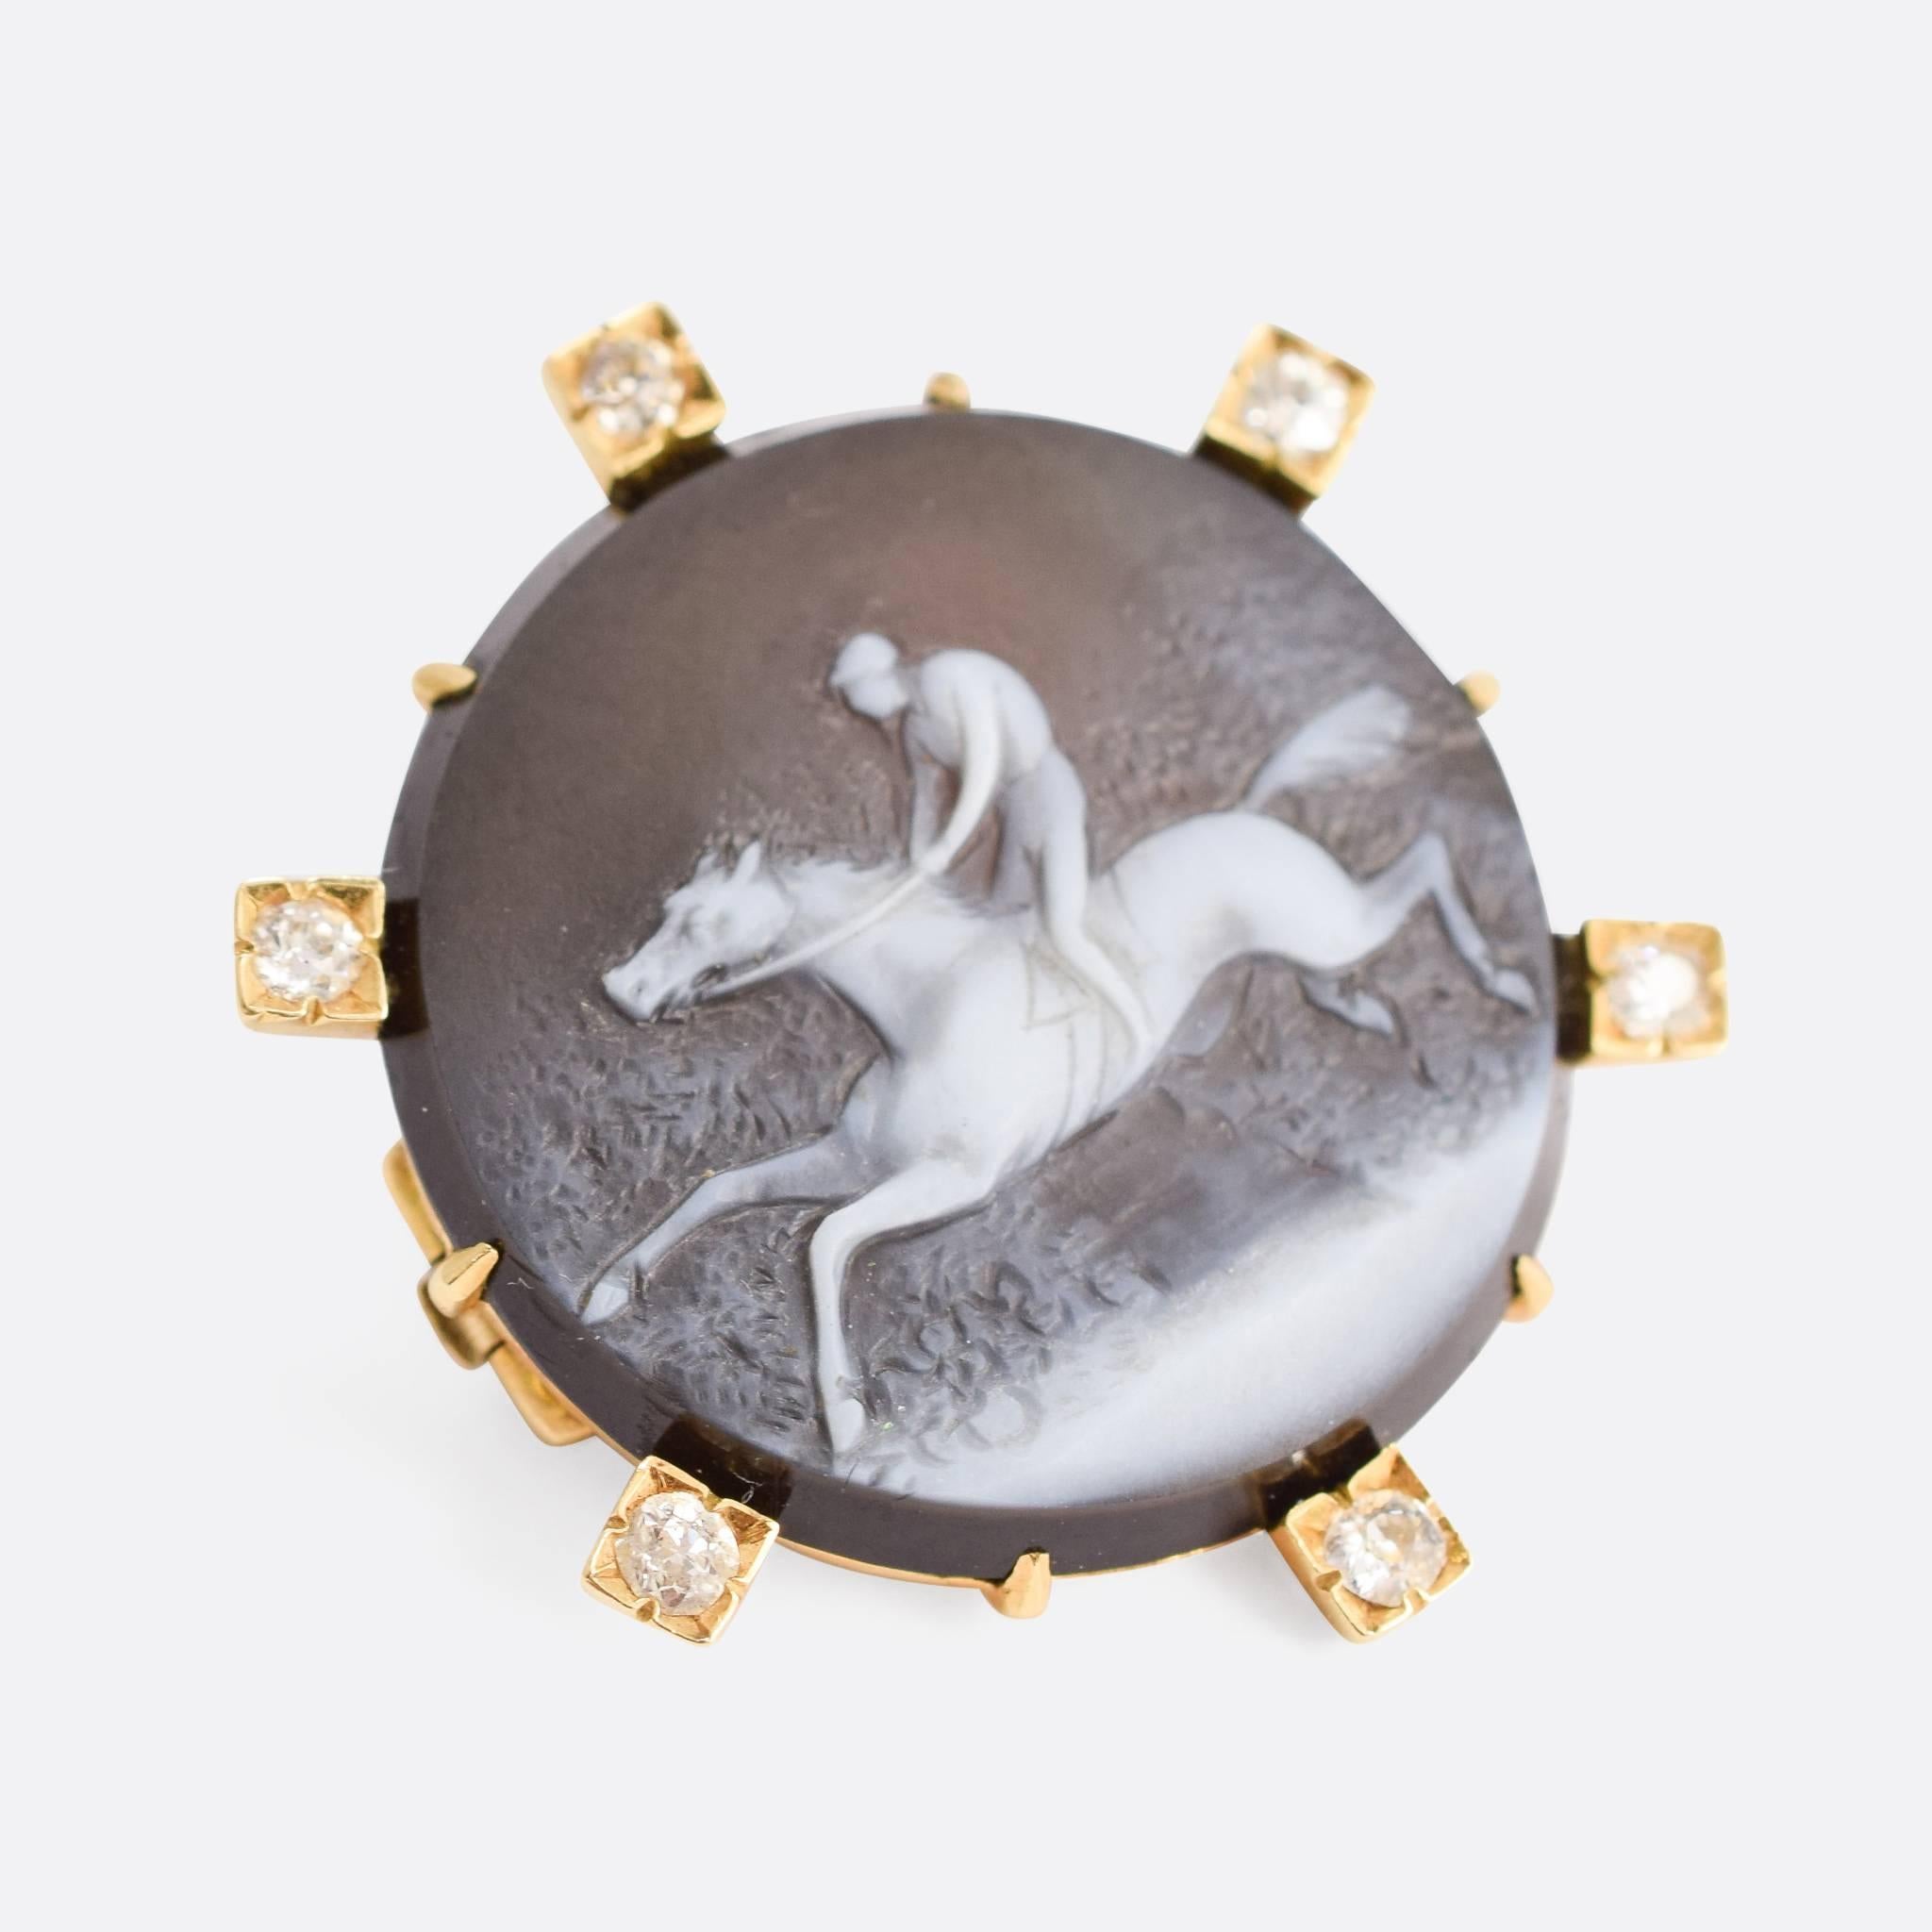 This wonderful antique brooch is set with an onyx cameo, carved to depict a galloping horse with rider. Modelled in 18ct gold, the piece has six old cut diamonds framing the central image.